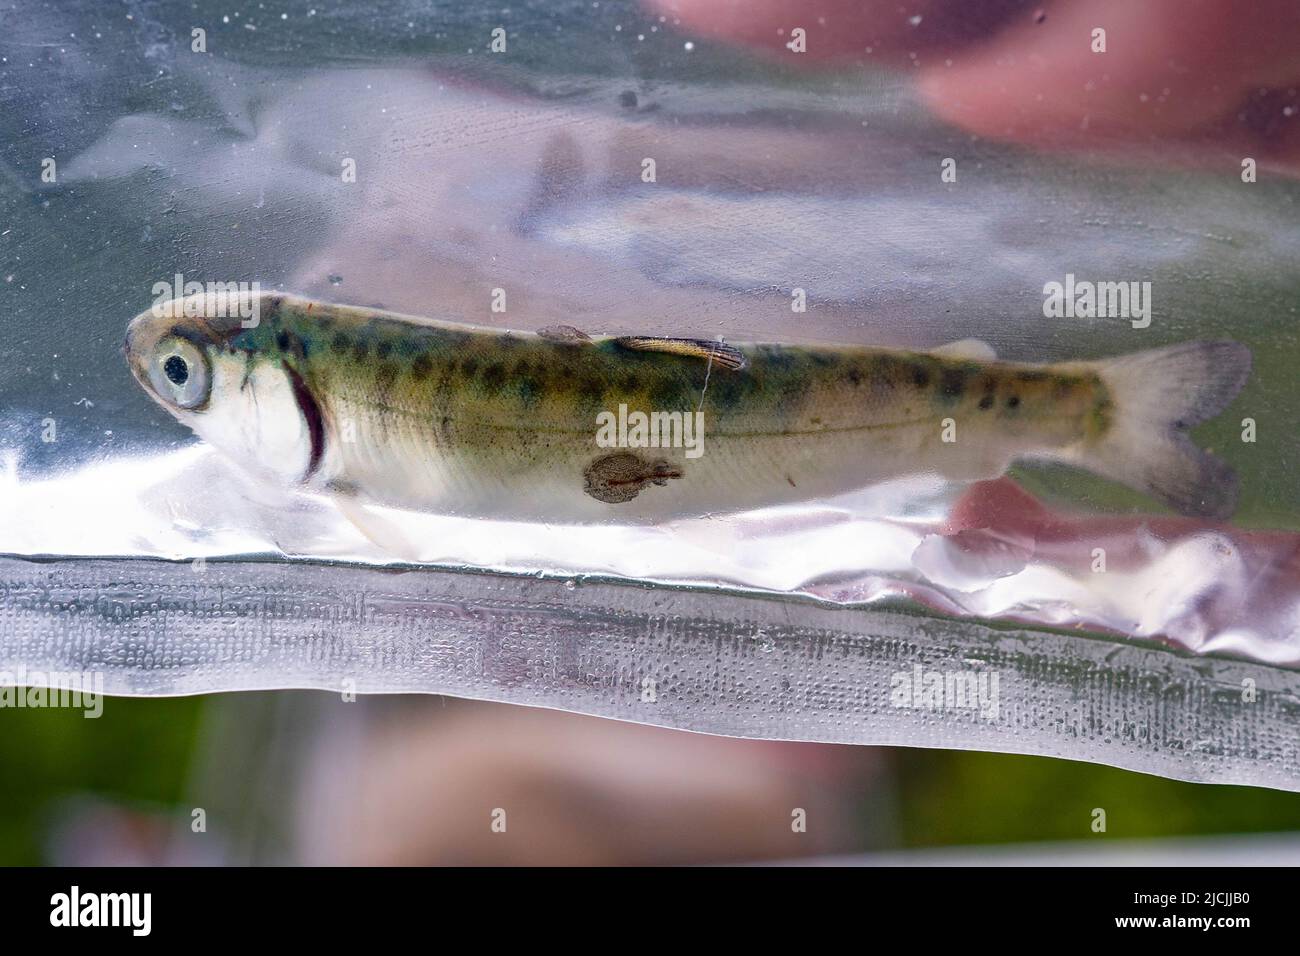 Juvenile salmon infested with sea lice in the Northeast coast of Vancouver island. Stock Photo